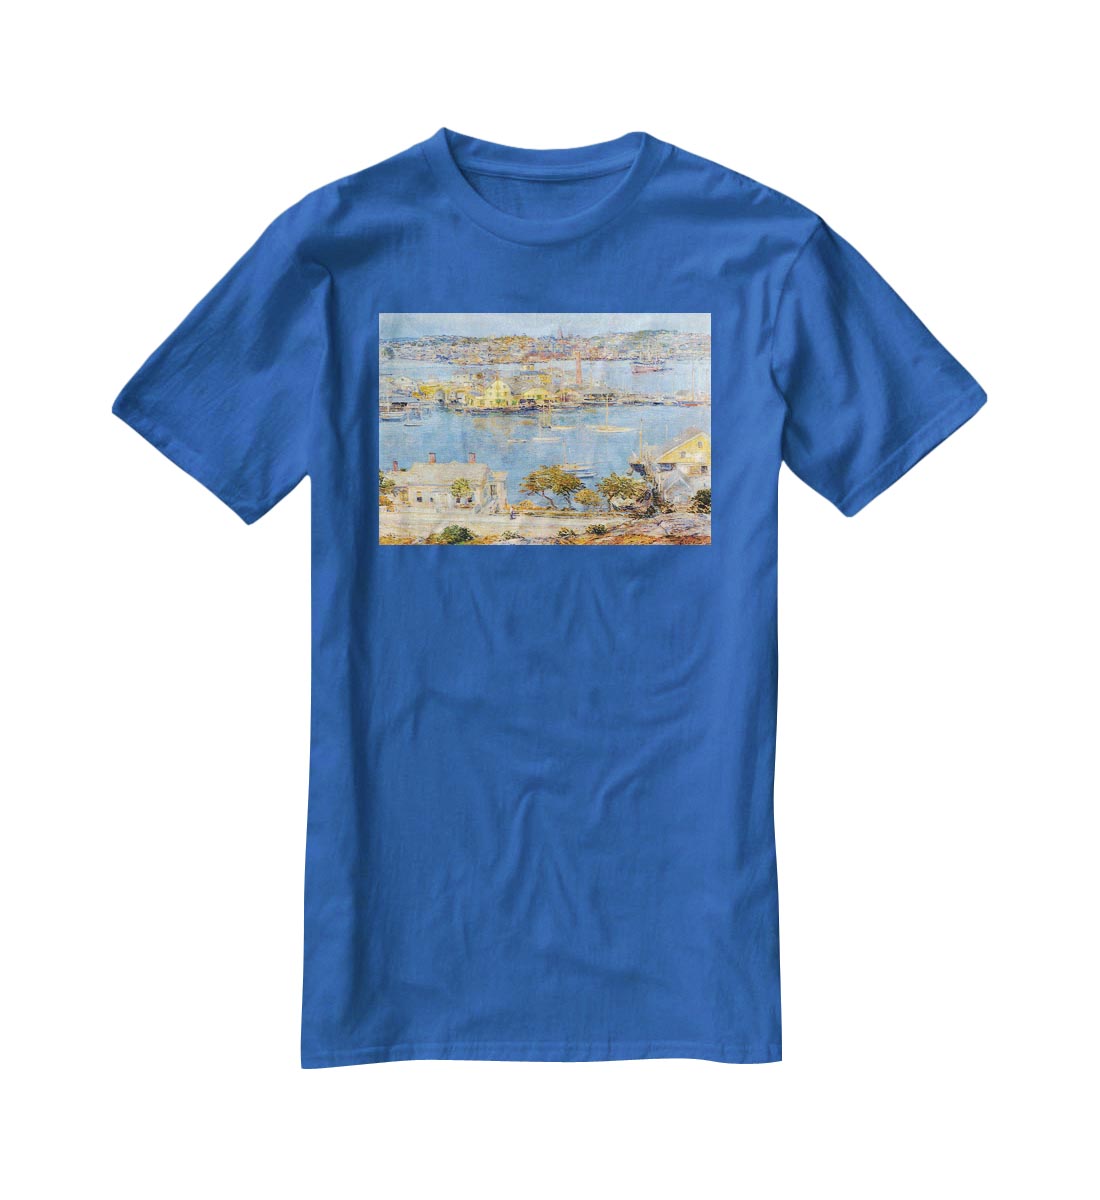 The port of Gloucester 1 by Hassam T-Shirt - Canvas Art Rocks - 2